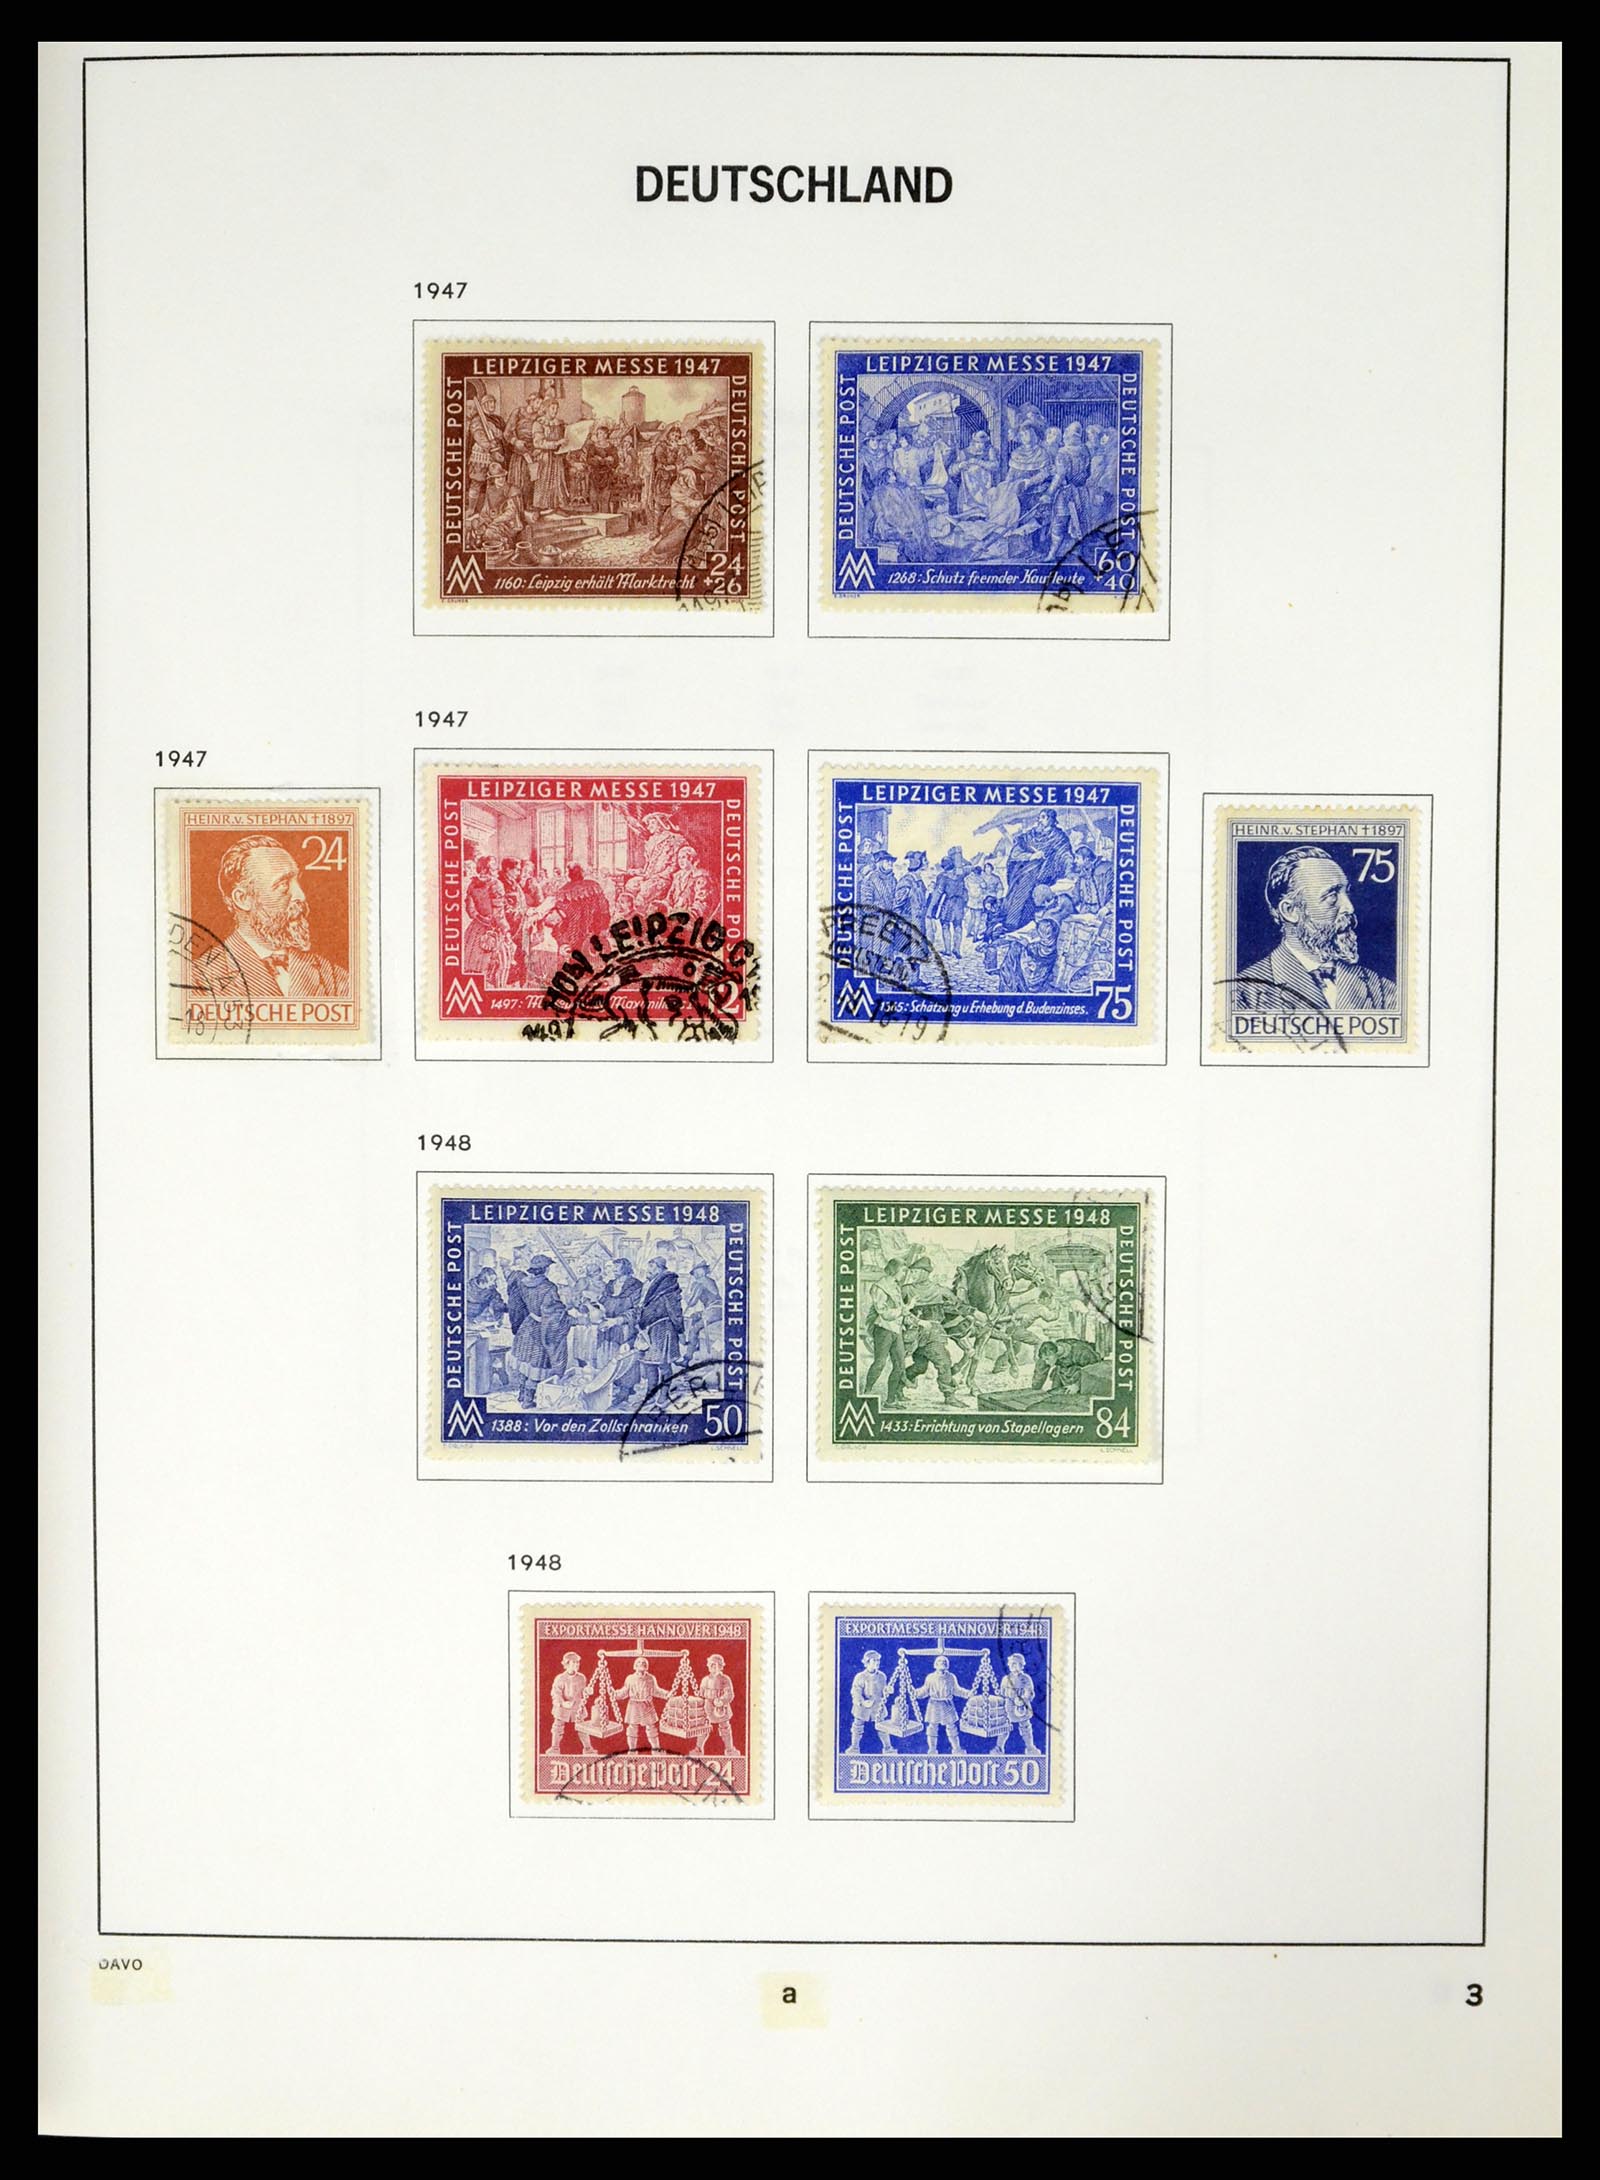 37330 019 - Stamp collection 37330 Germany 1946-1969.